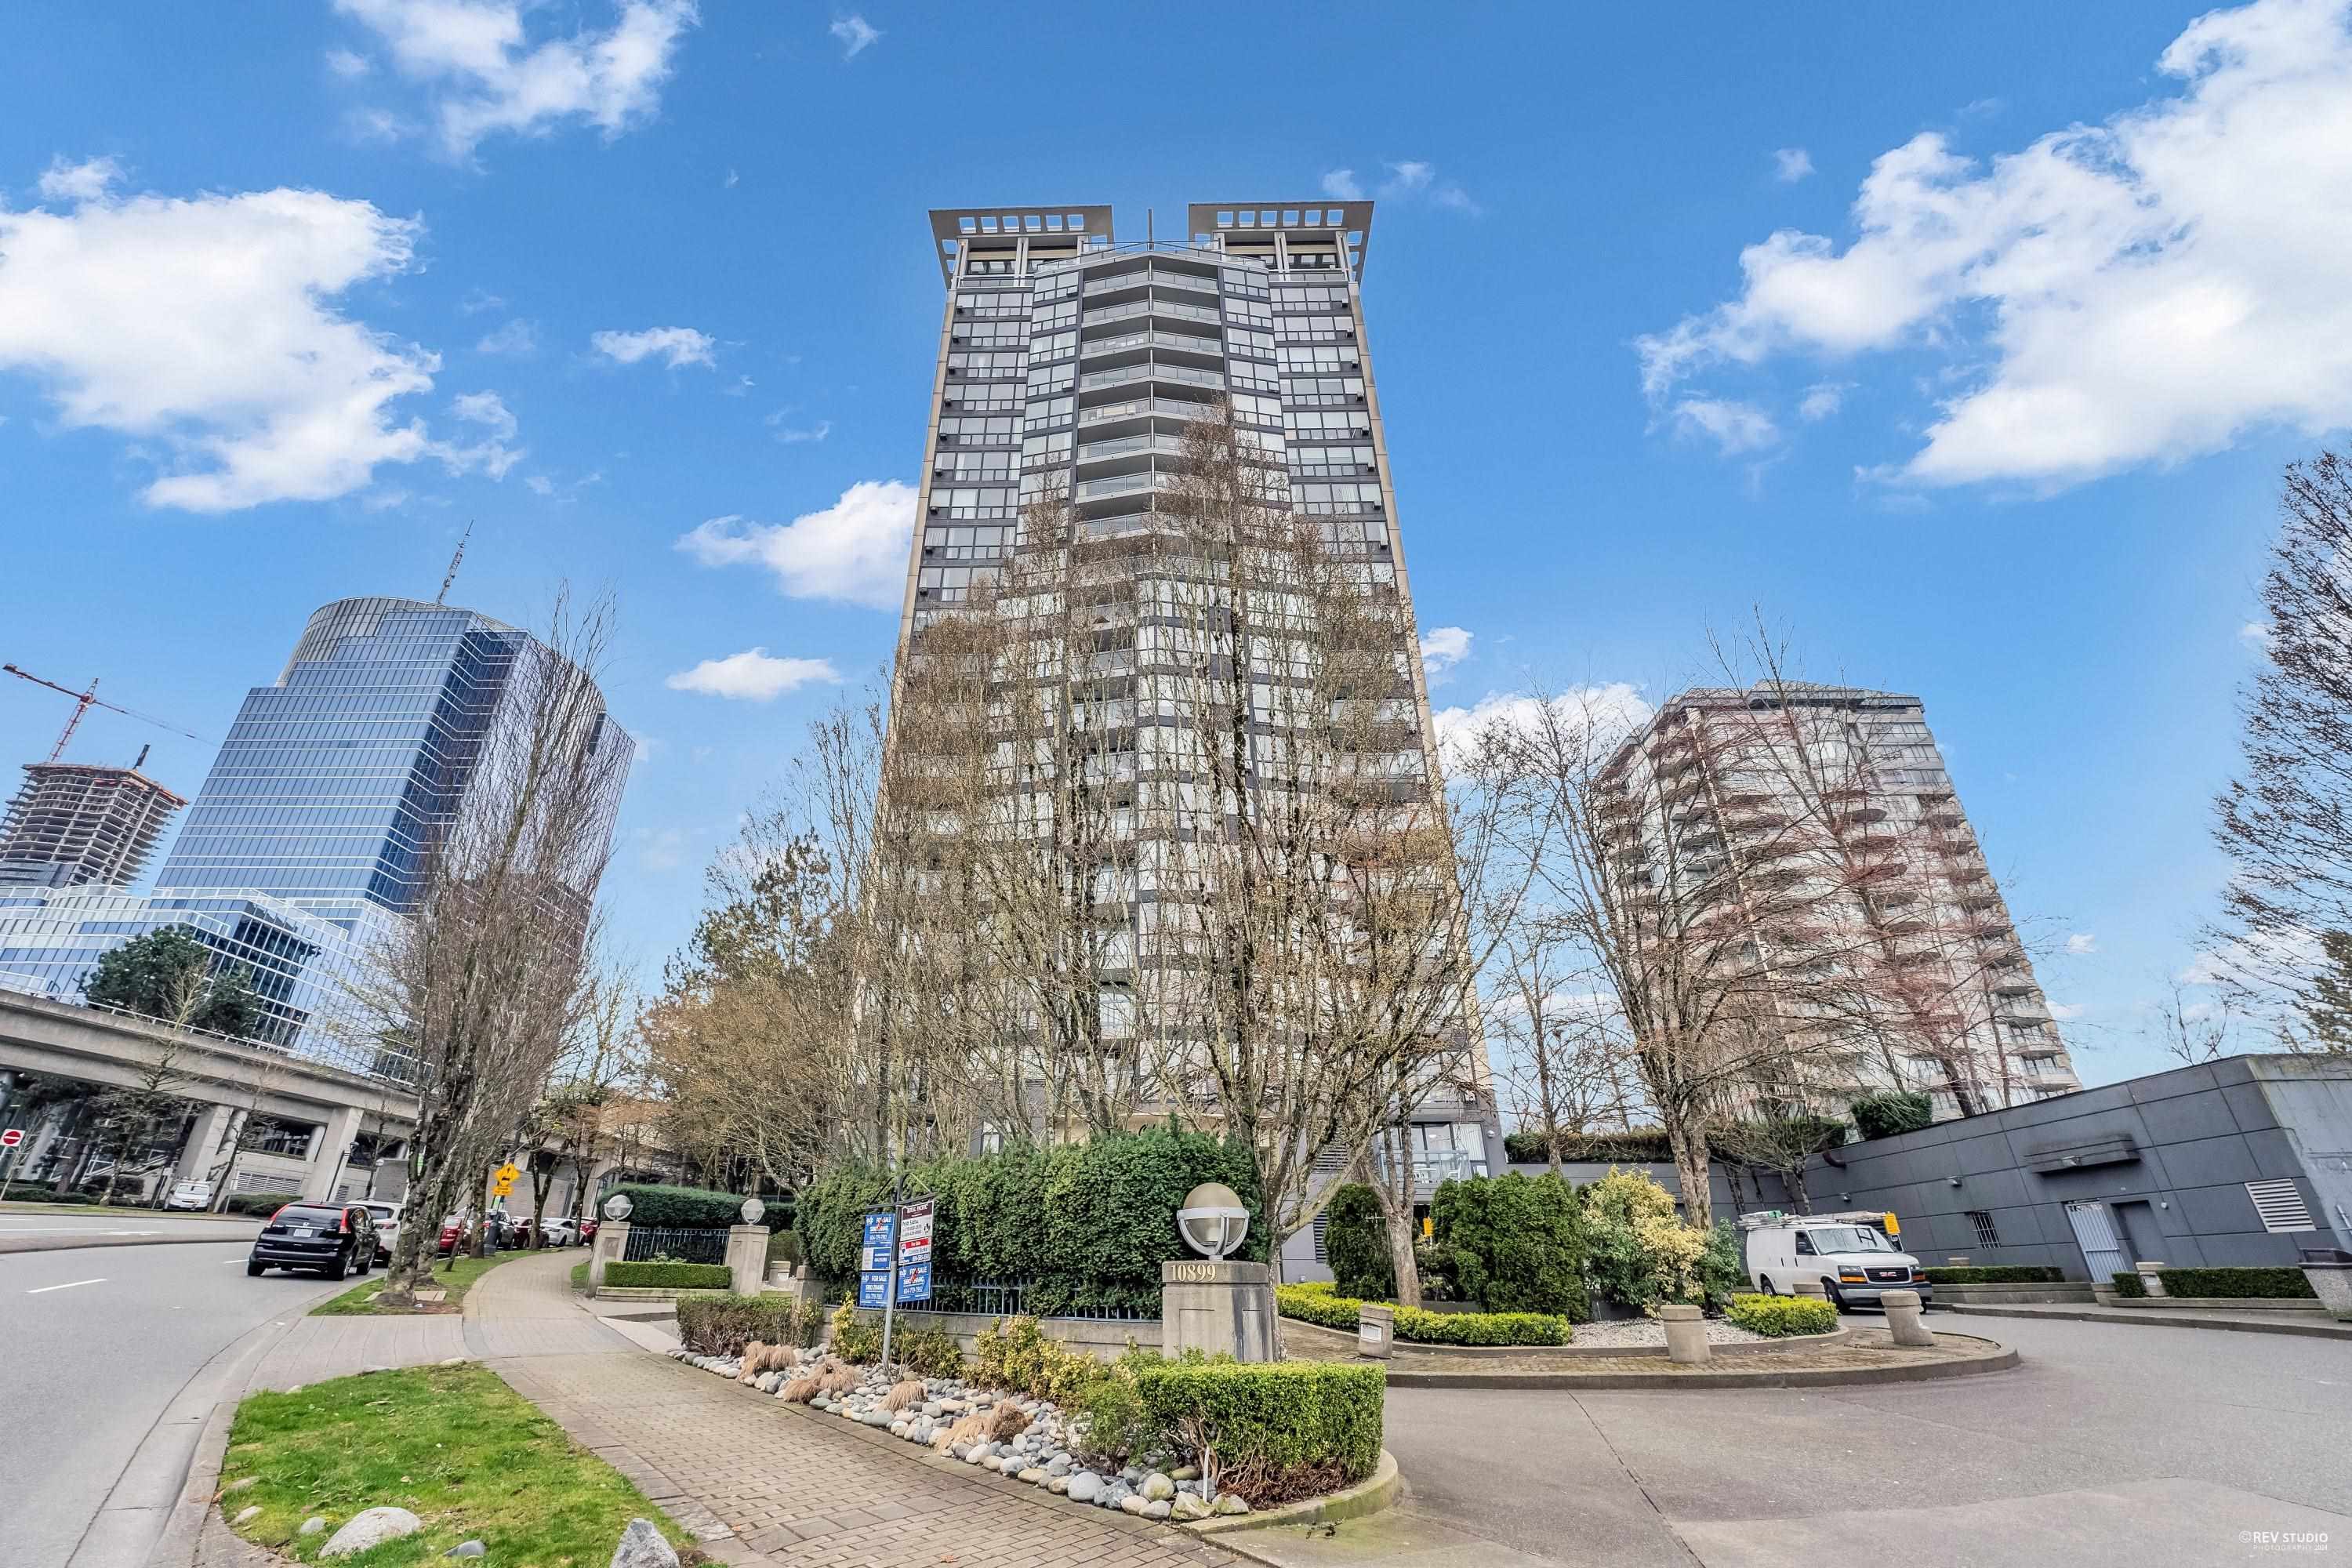 10899 UNIVERSITY, Surrey, British Columbia V3T 5V2, 1 Bedroom Bedrooms, ,Residential Attached,For Sale,UNIVERSITY,R2873377